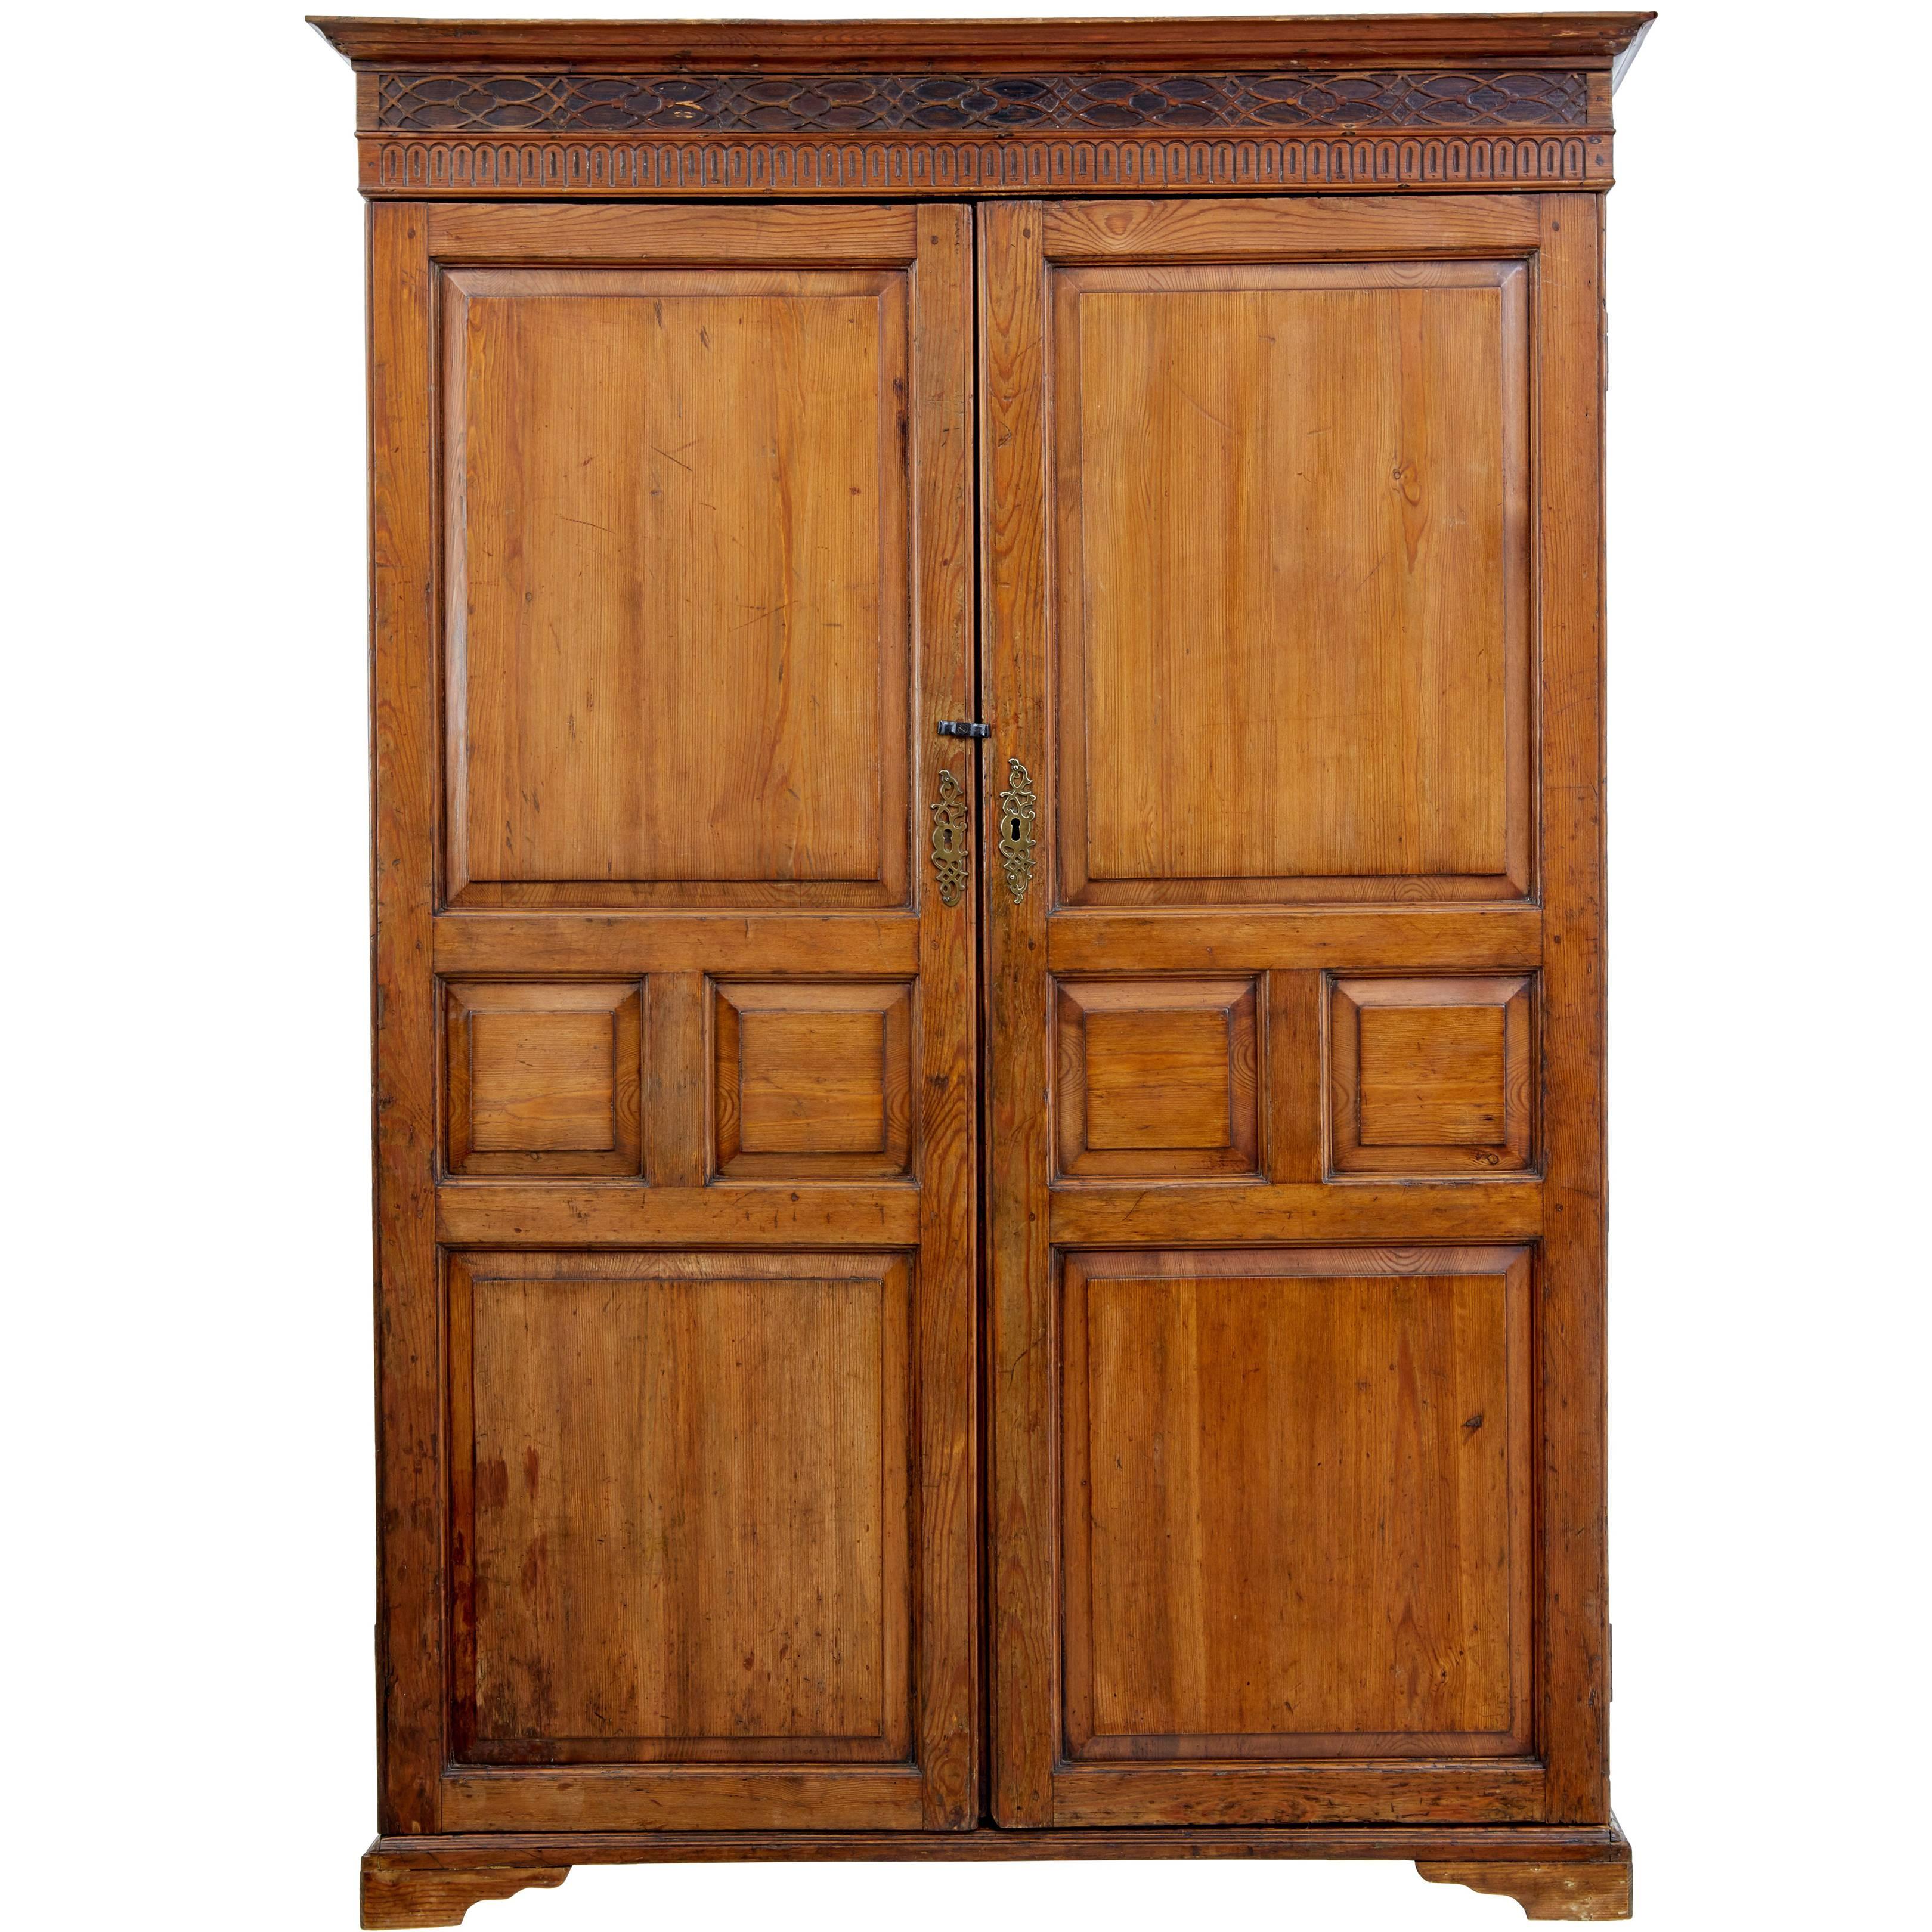 19th Century English William IV Pine House Keepers Cupboard